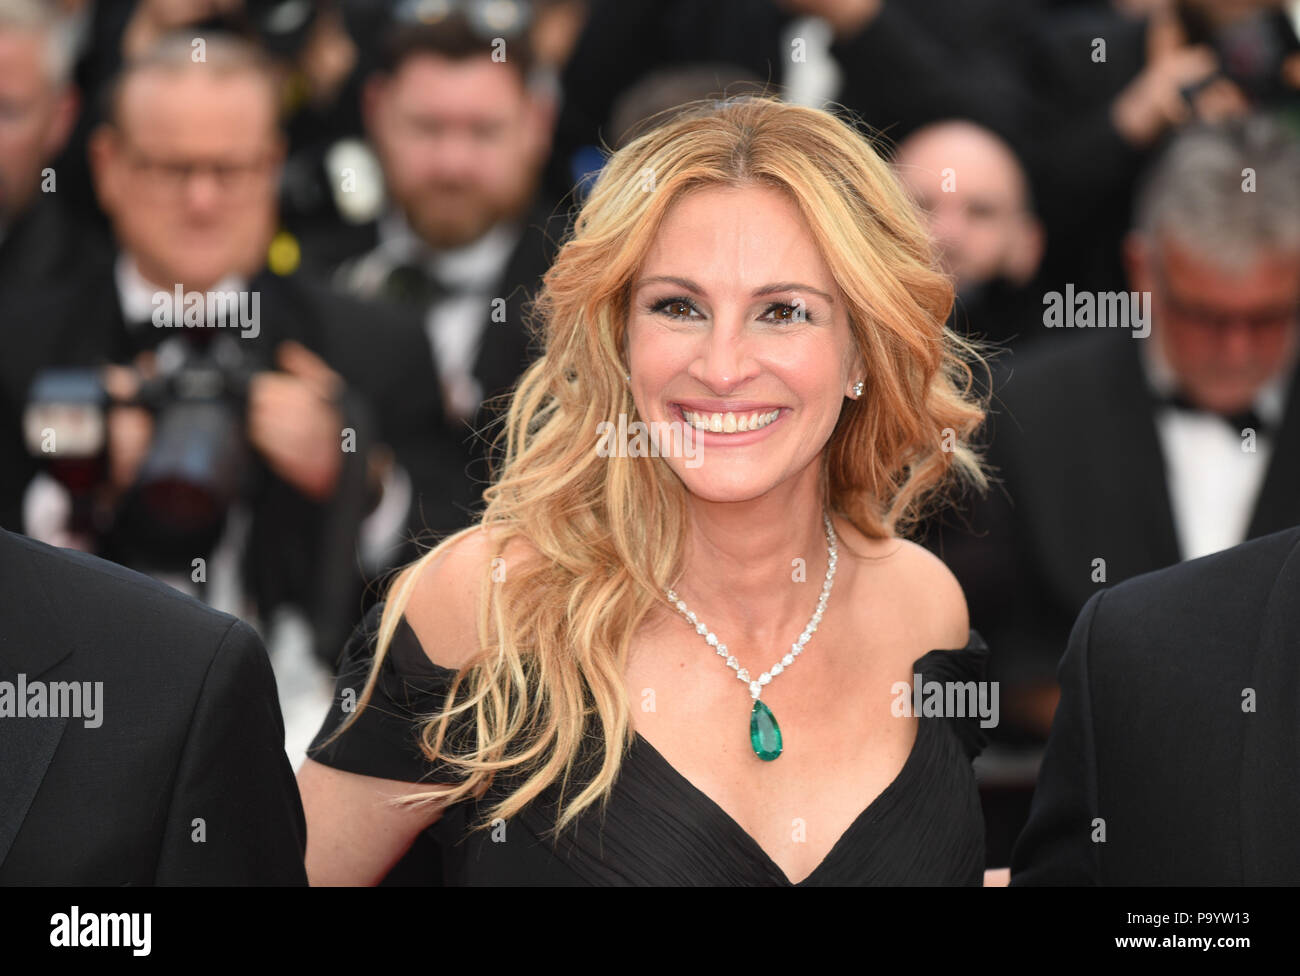 May 12, 2016 - Cannes, France: Julia Roberts attends the 'Money Monster' premiere during the 69th Cannes film festival.  Julia Roberts lors du 69eme Festival de Cannes. *** FRANCE OUT / NO SALES TO FRENCH MEDIA *** Stock Photo